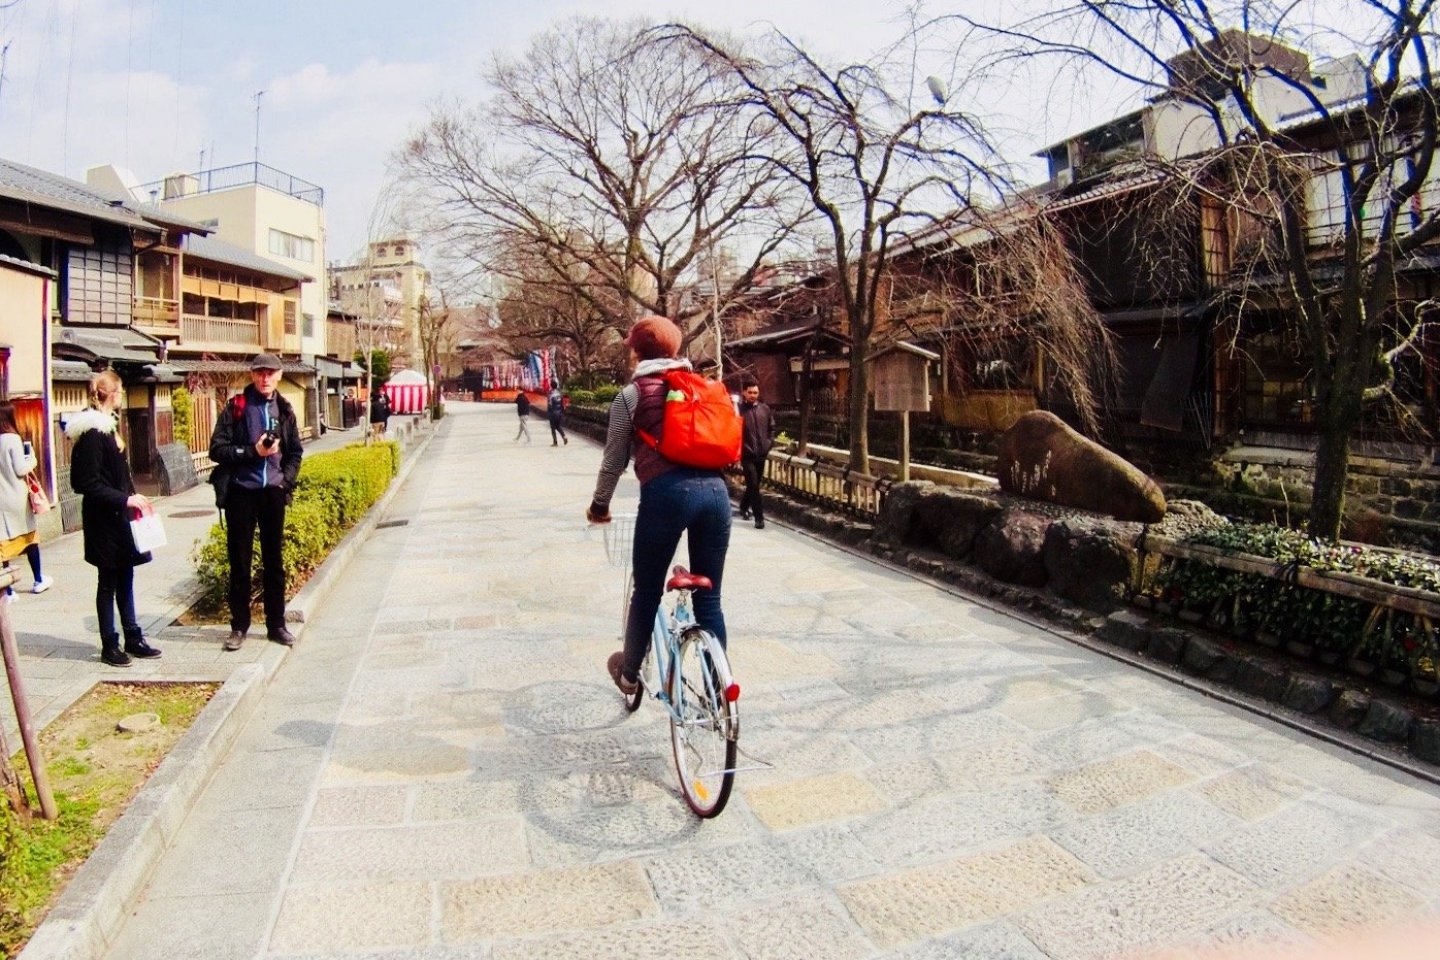 The Japanese can be very generous. Enjoying Kyoto on a borrowed bicycle.